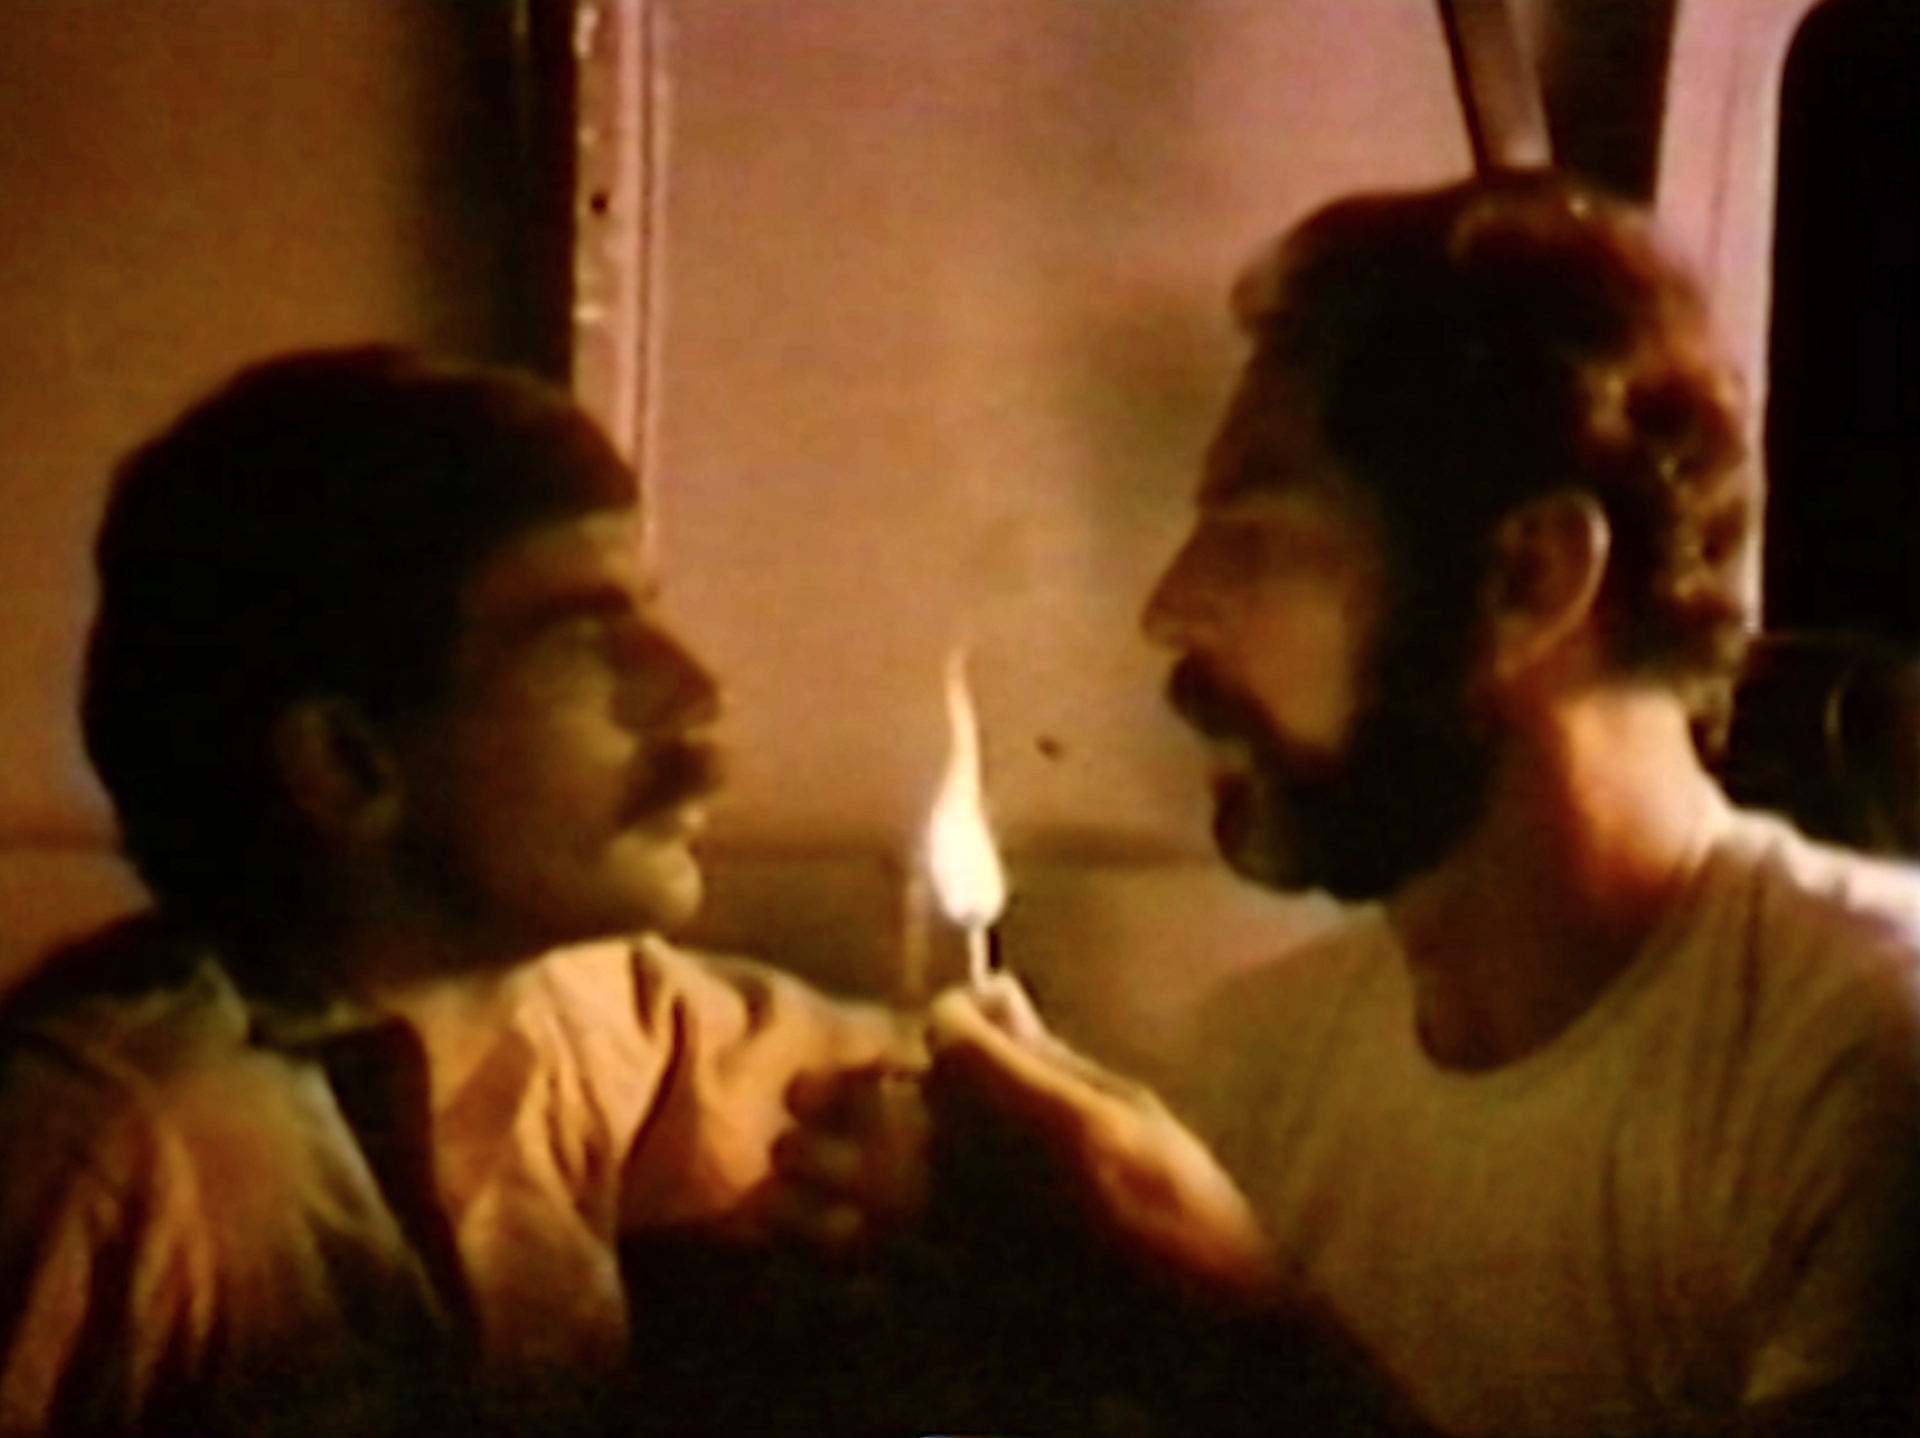 A still from 'Ask Any Buddy,' depicting two men with a flame between them.